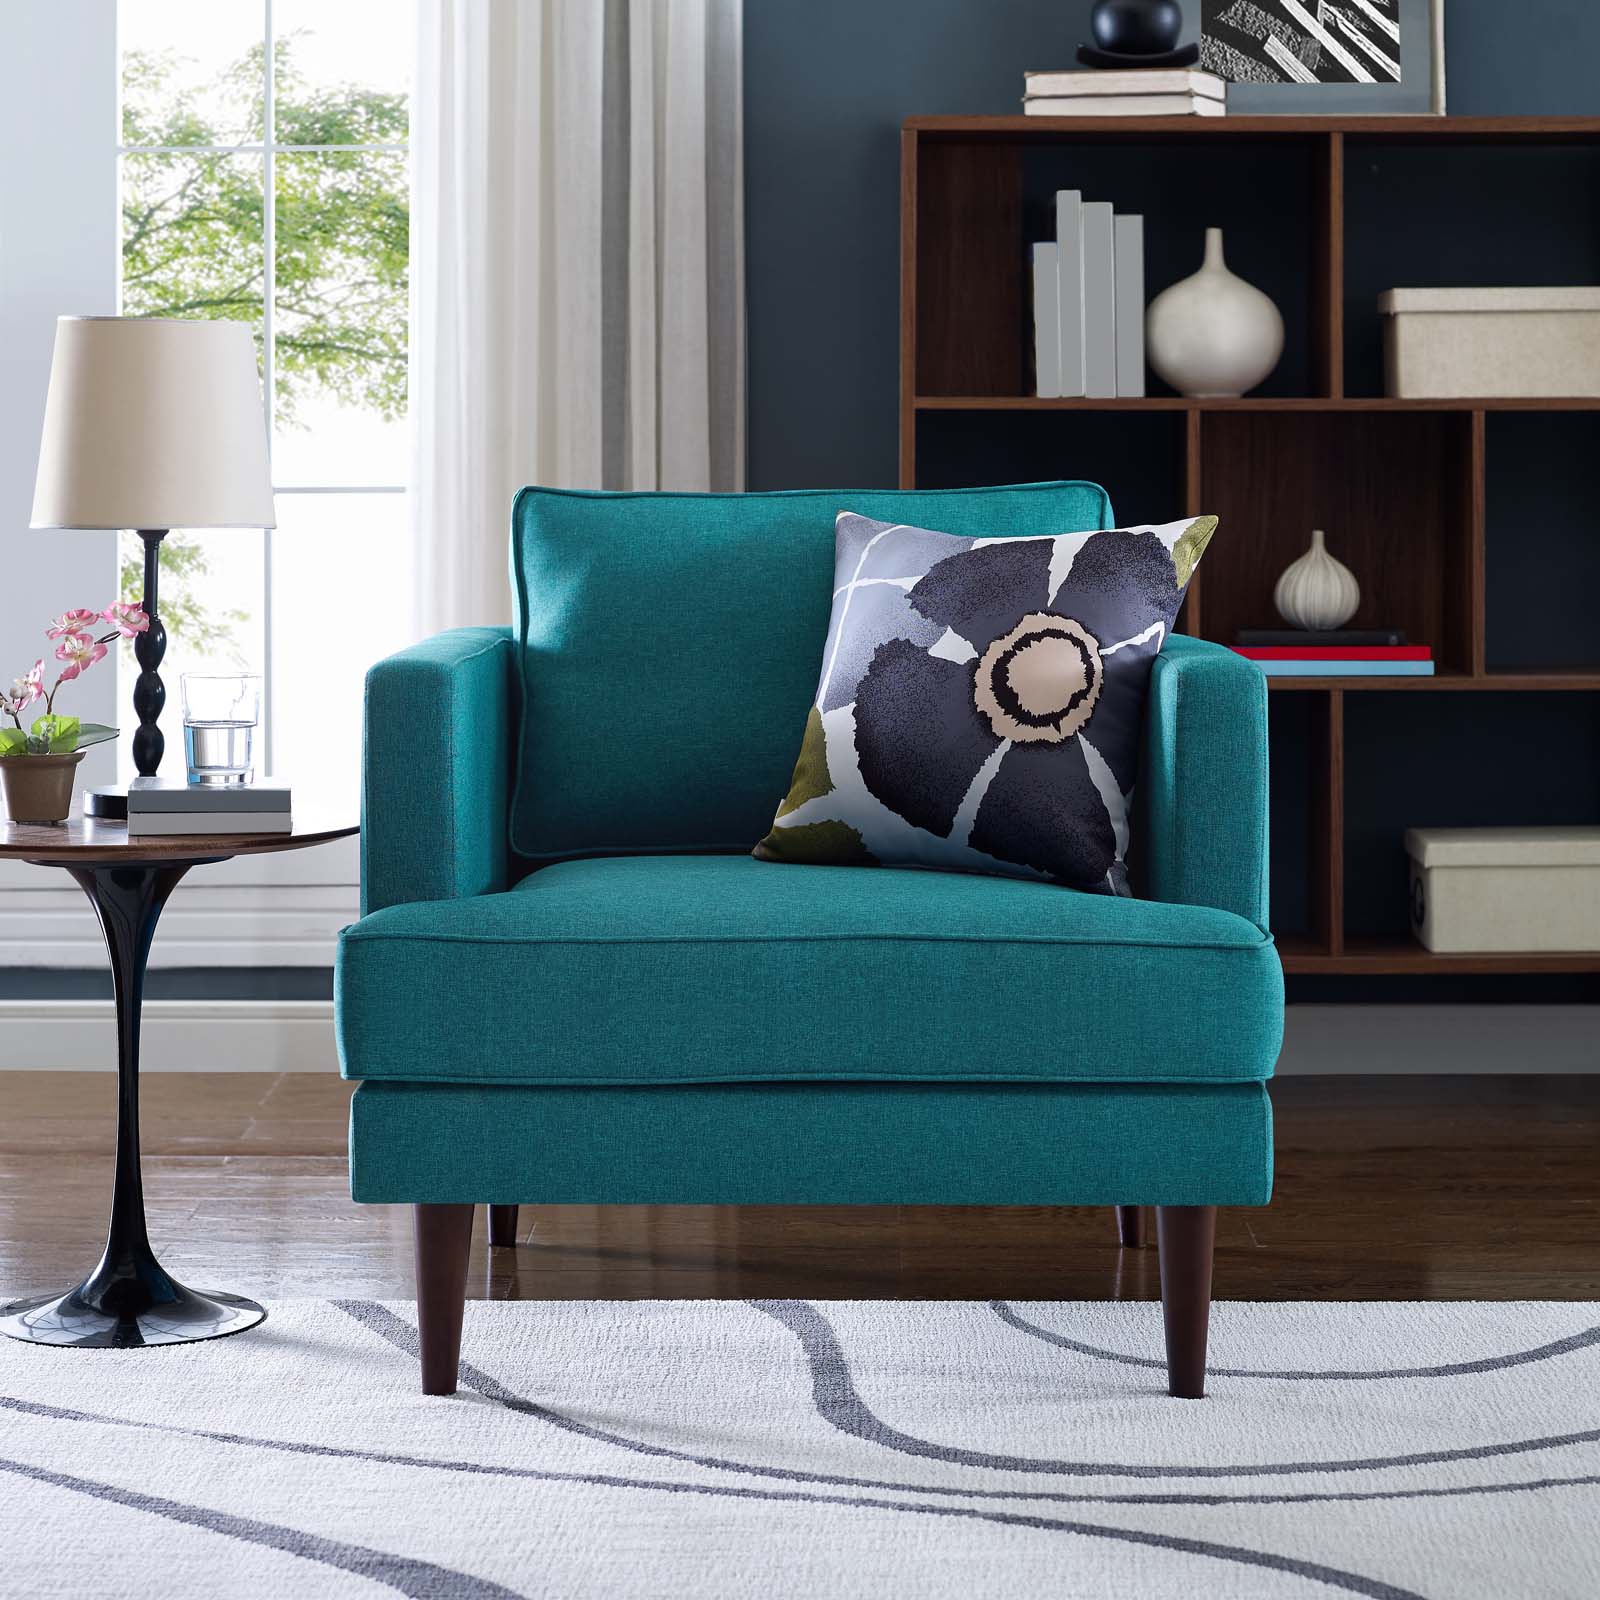 Modway Accent Chairs - Agile Upholstered Fabric Armchair Teal